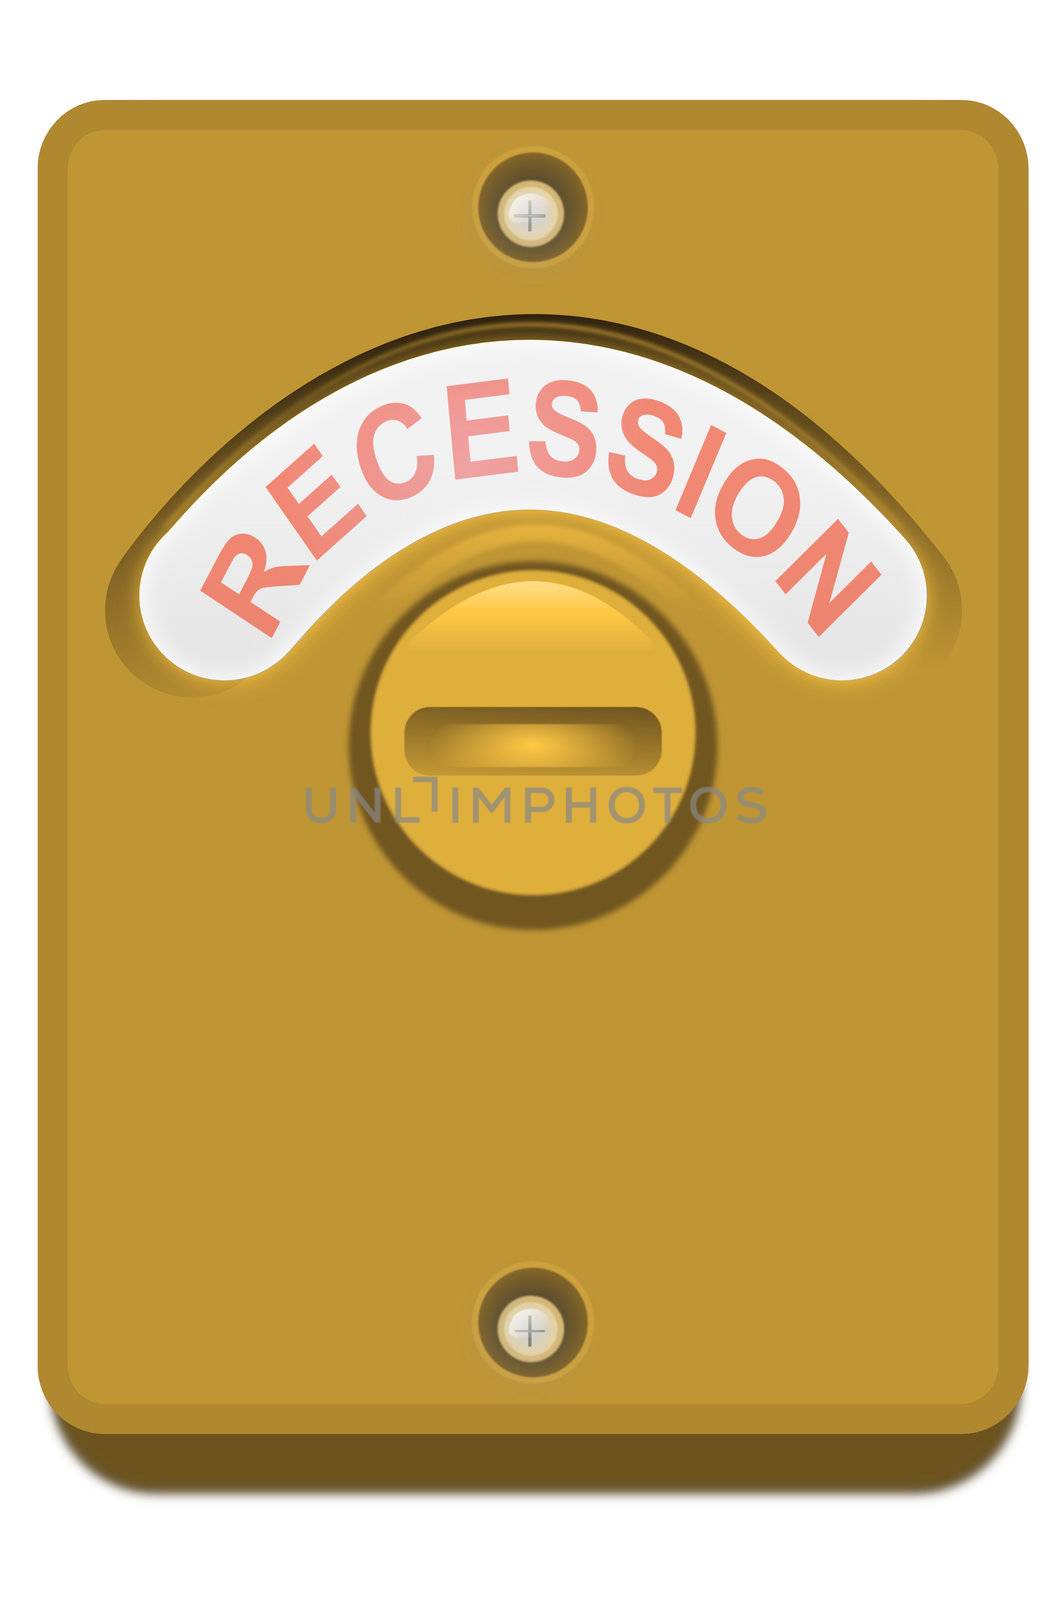 Illustration of a bronze toilet door lock with the 'recession' position showing. White background.